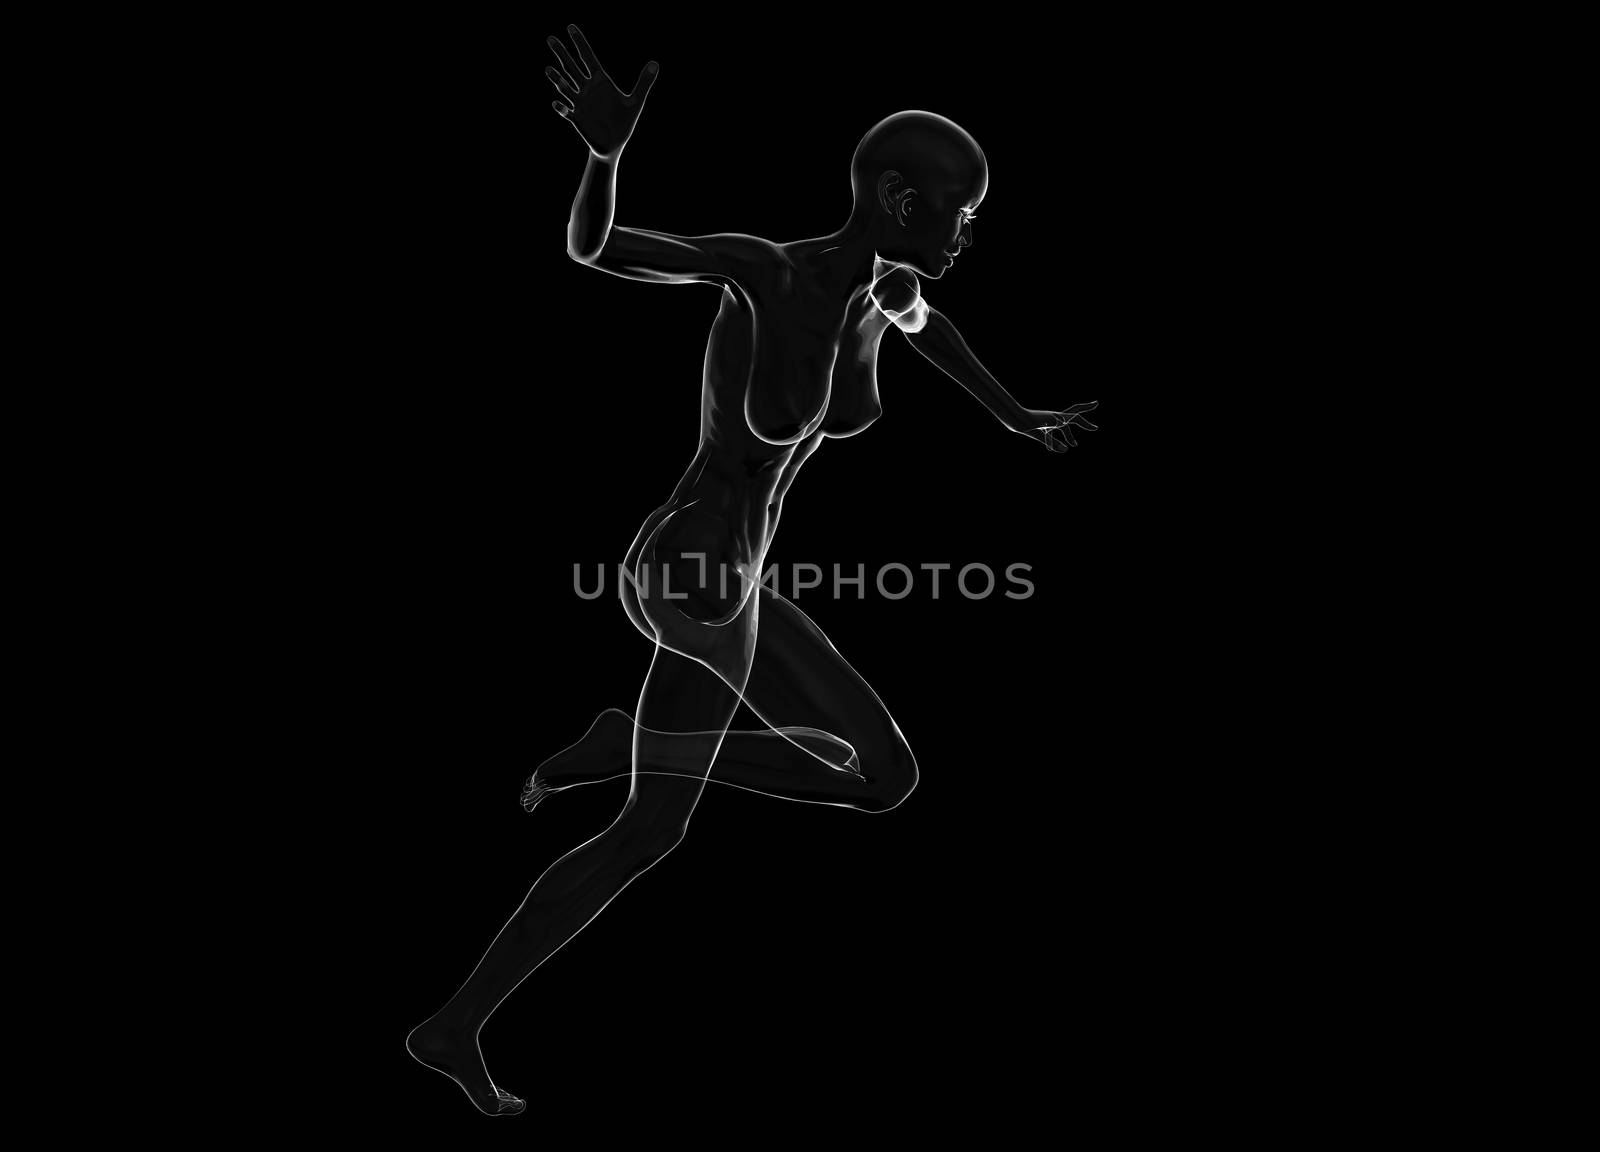 Slim attractive sportswoman made of glass or soap bubble running against a black background. 3d illustration by skrotov